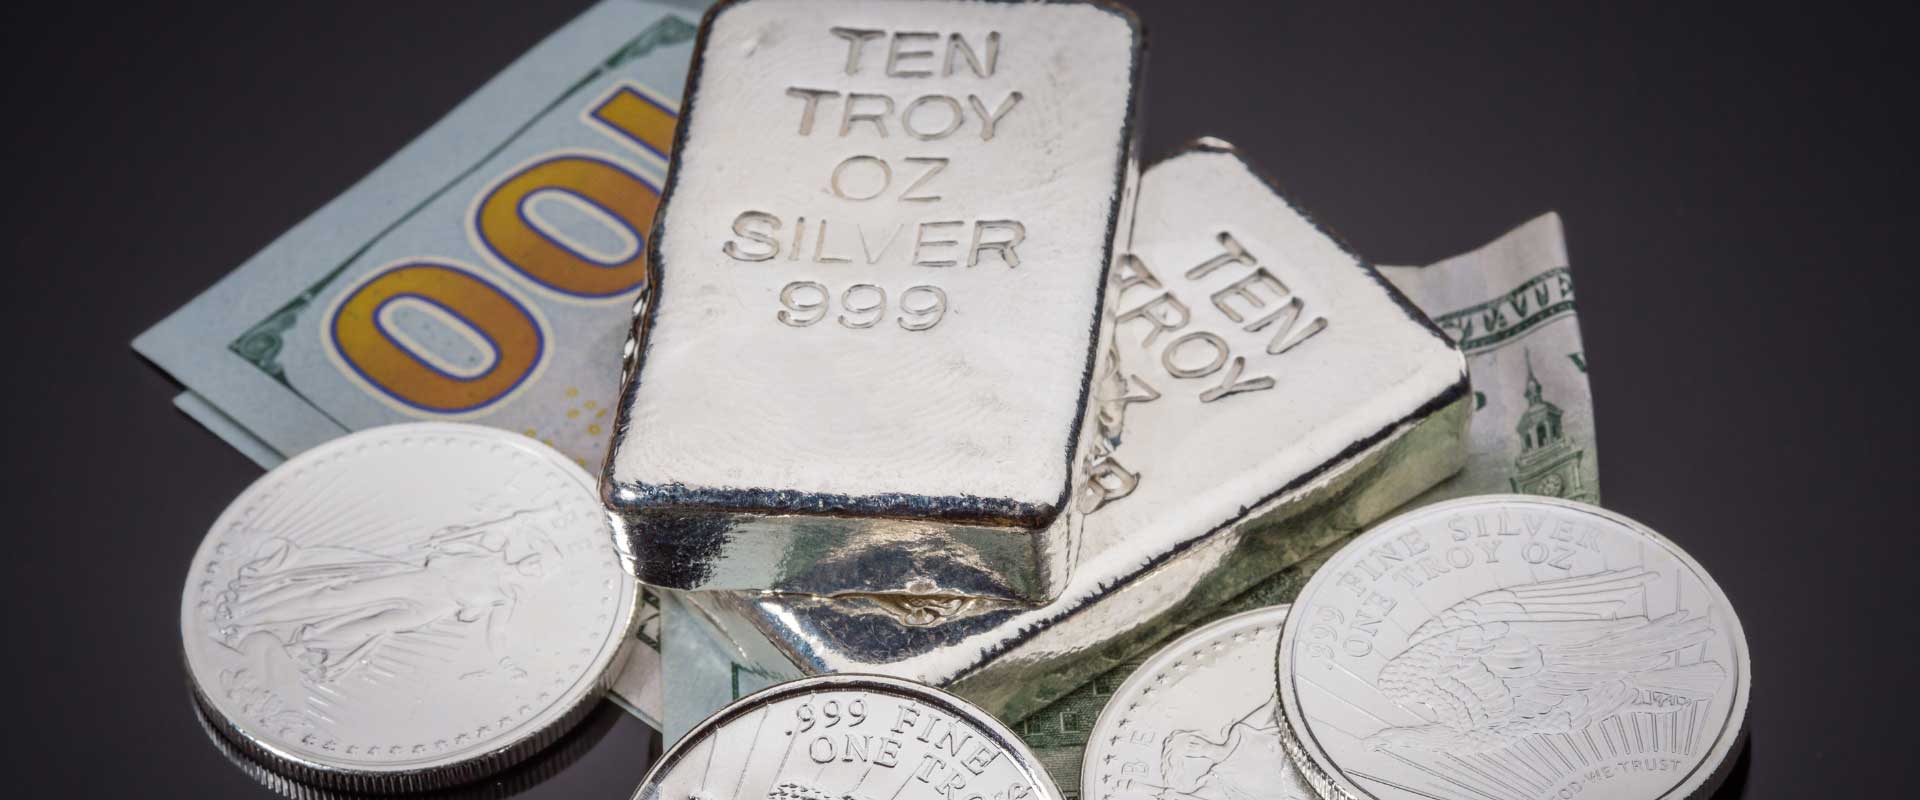 ten troy silver bars and silver coins on banknotes